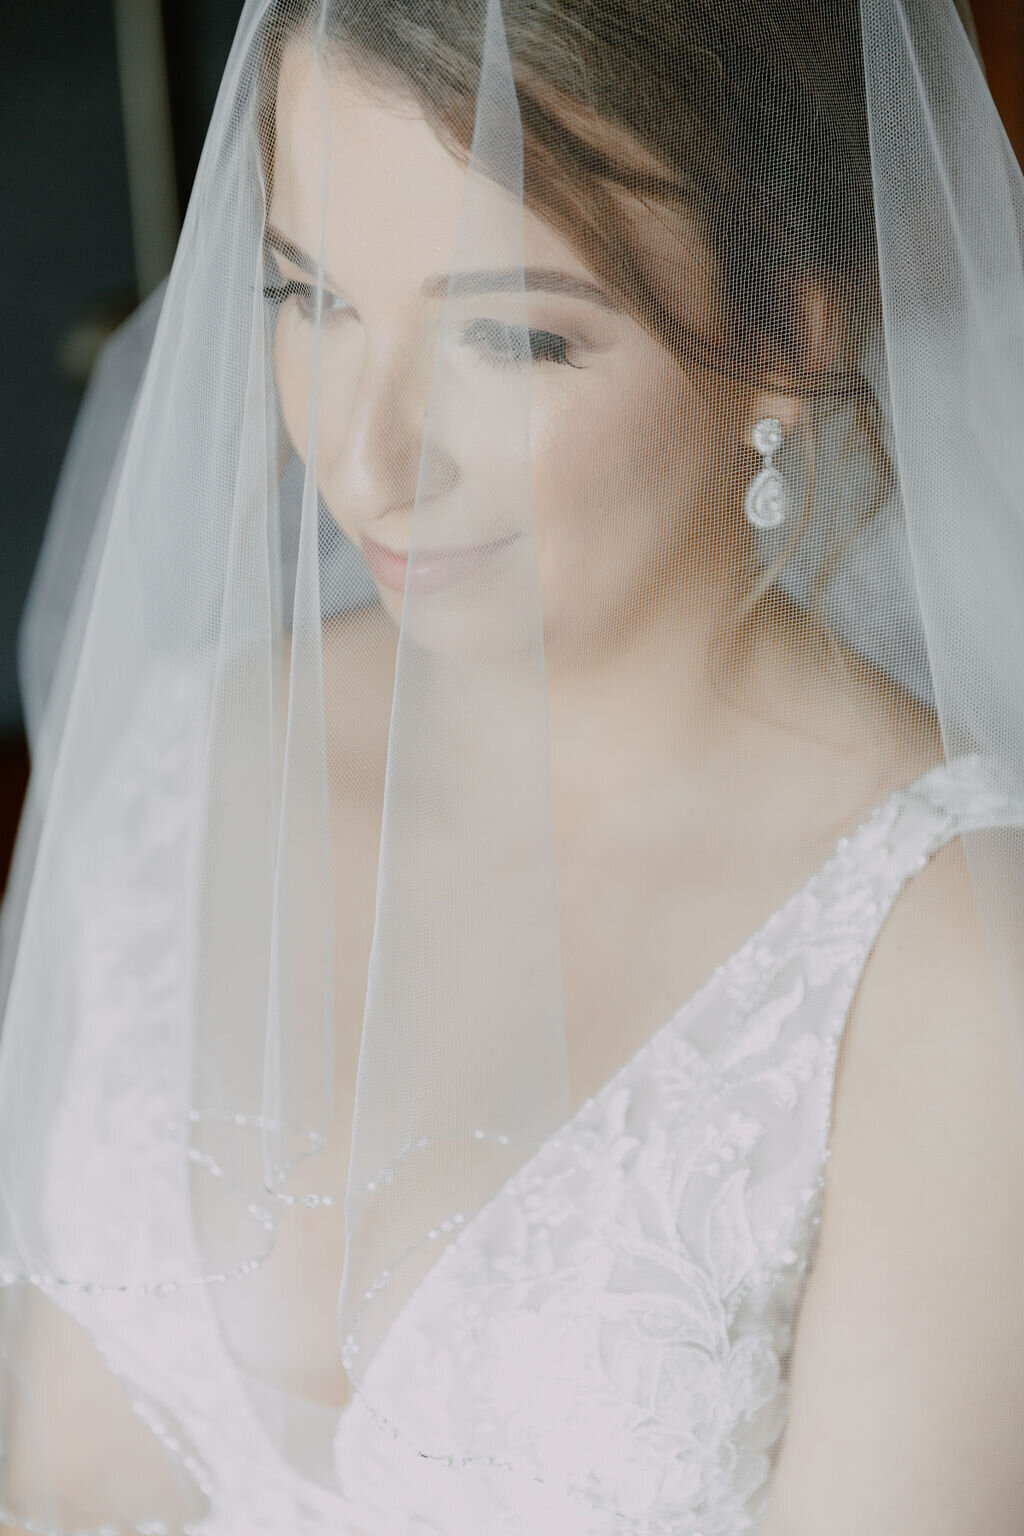 Delicate image of the bride's veil, its fine fabric and details symbolizing tradition and the beauty of the wedding ceremony.